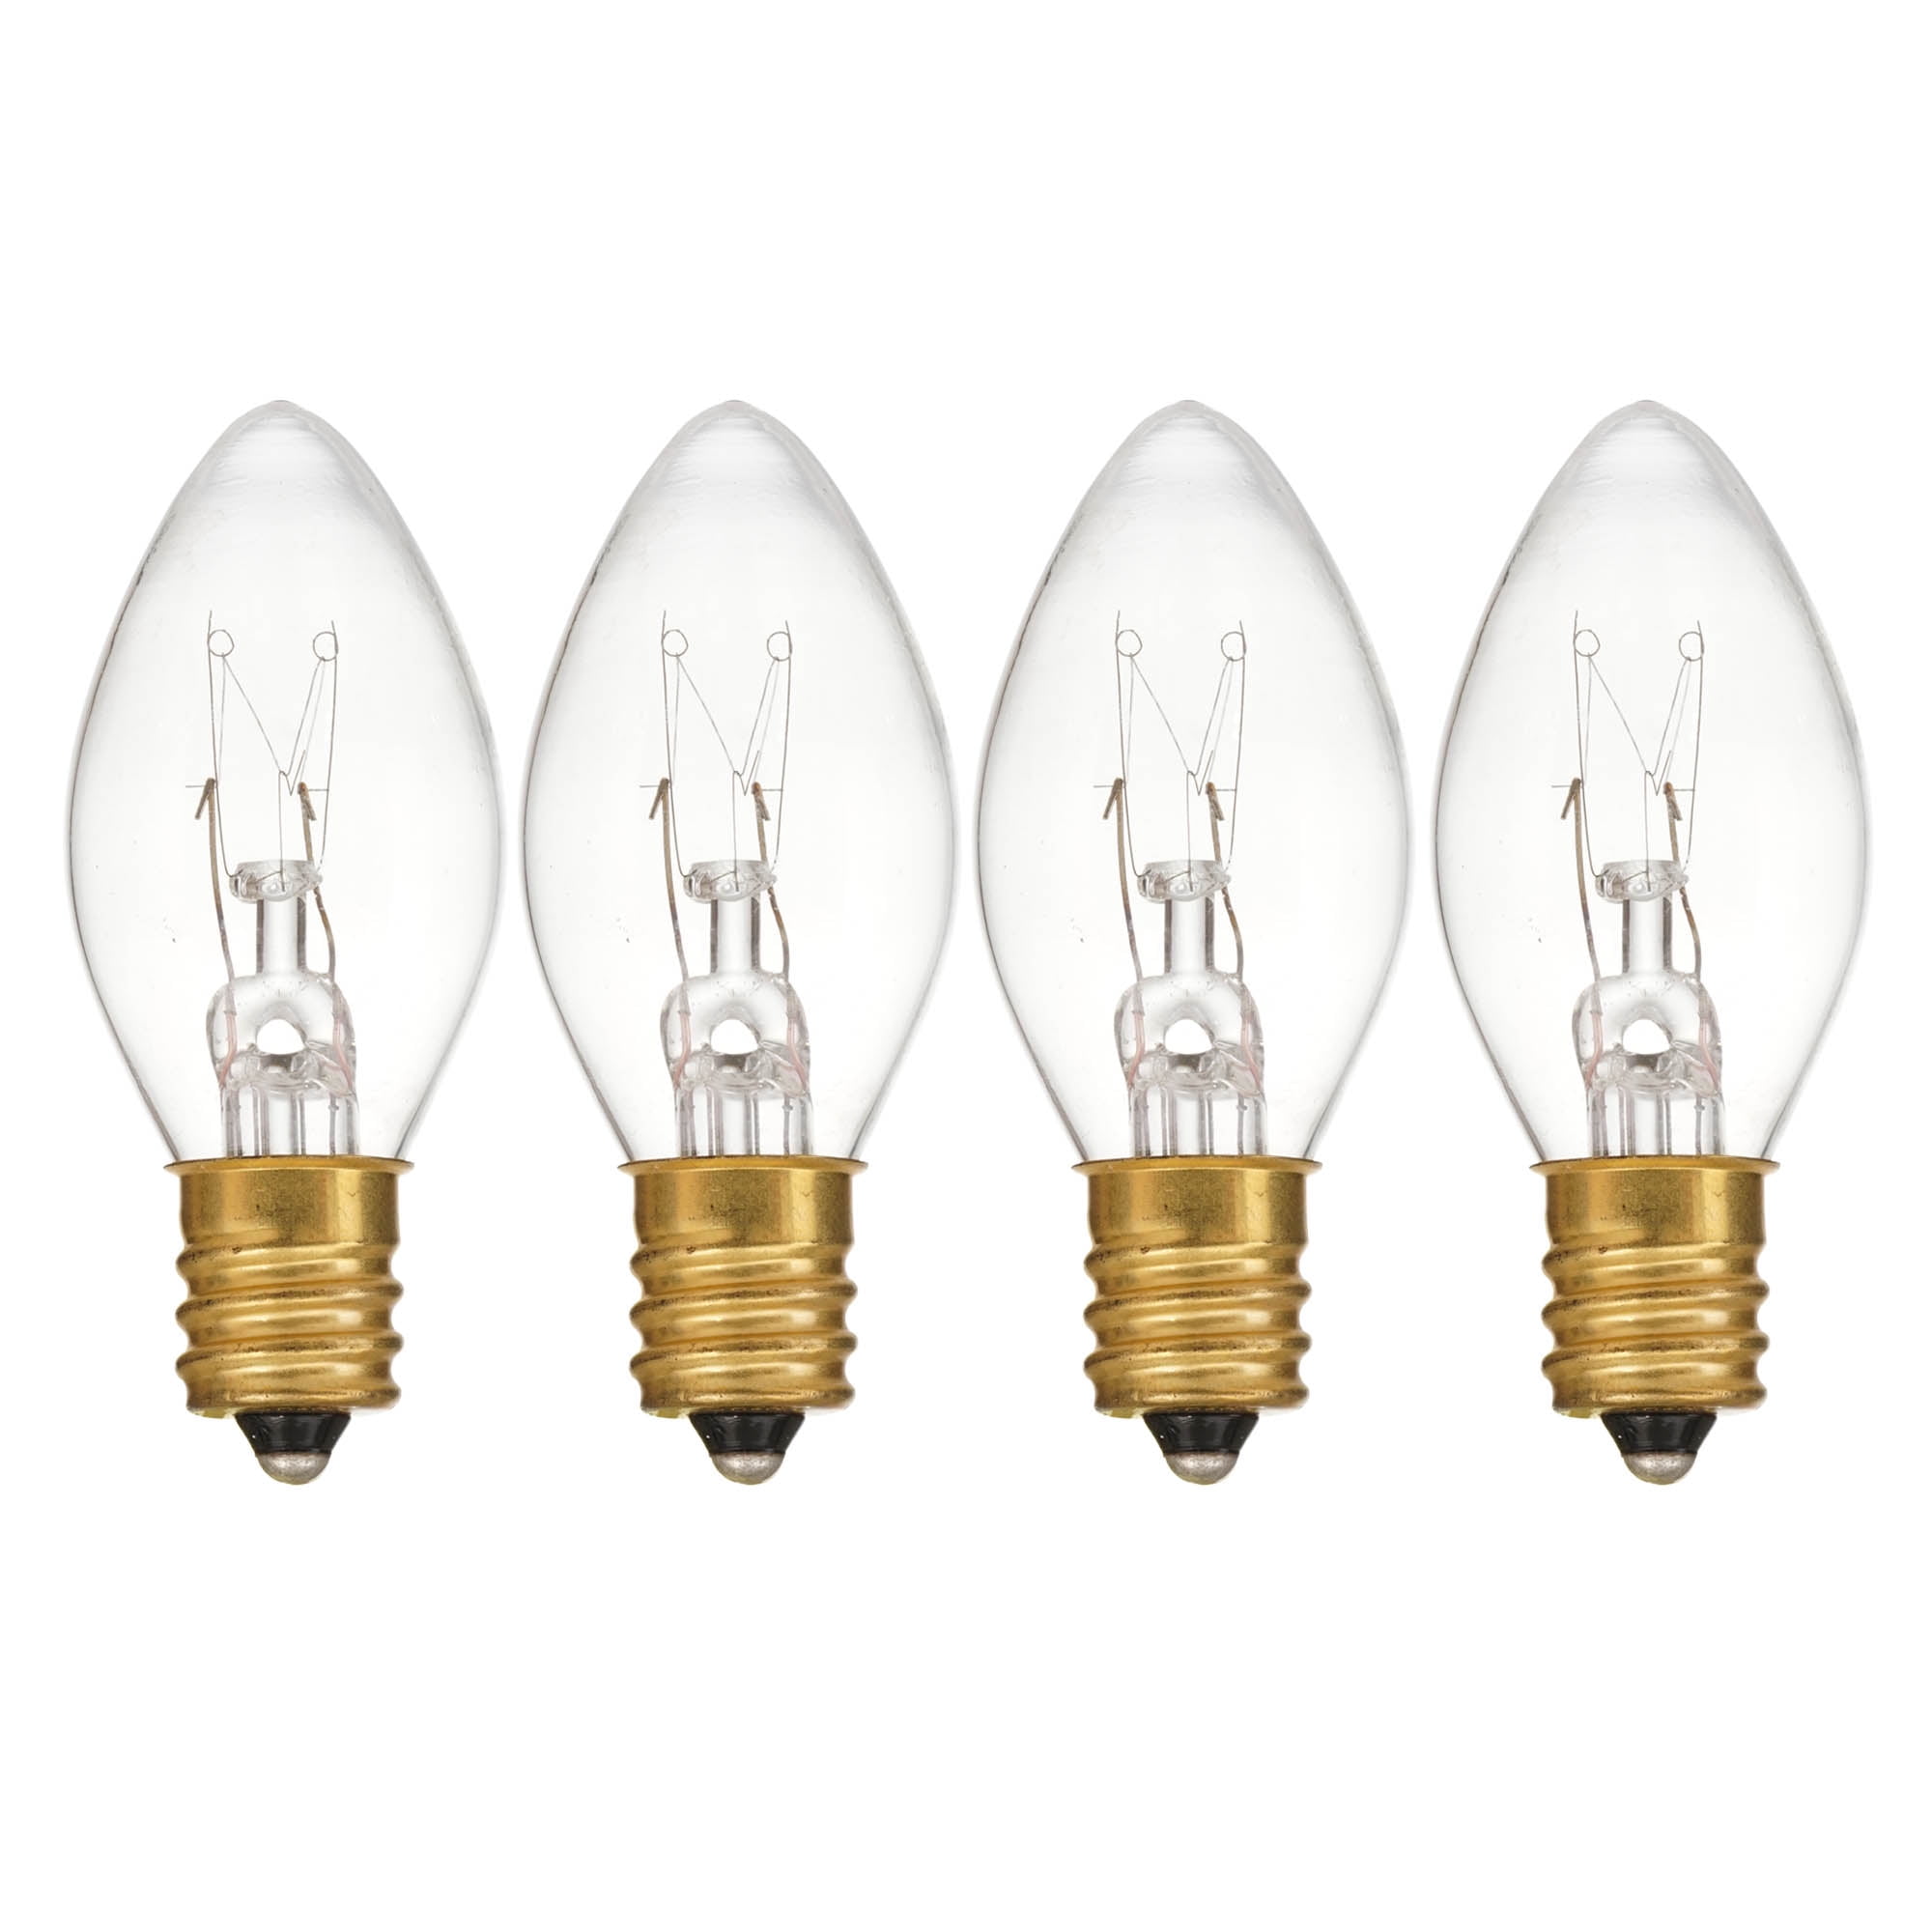 Holiday Time 5-Watt Incandescent C7 Replacement Christmas Bulbs, Clear, 4-Pack